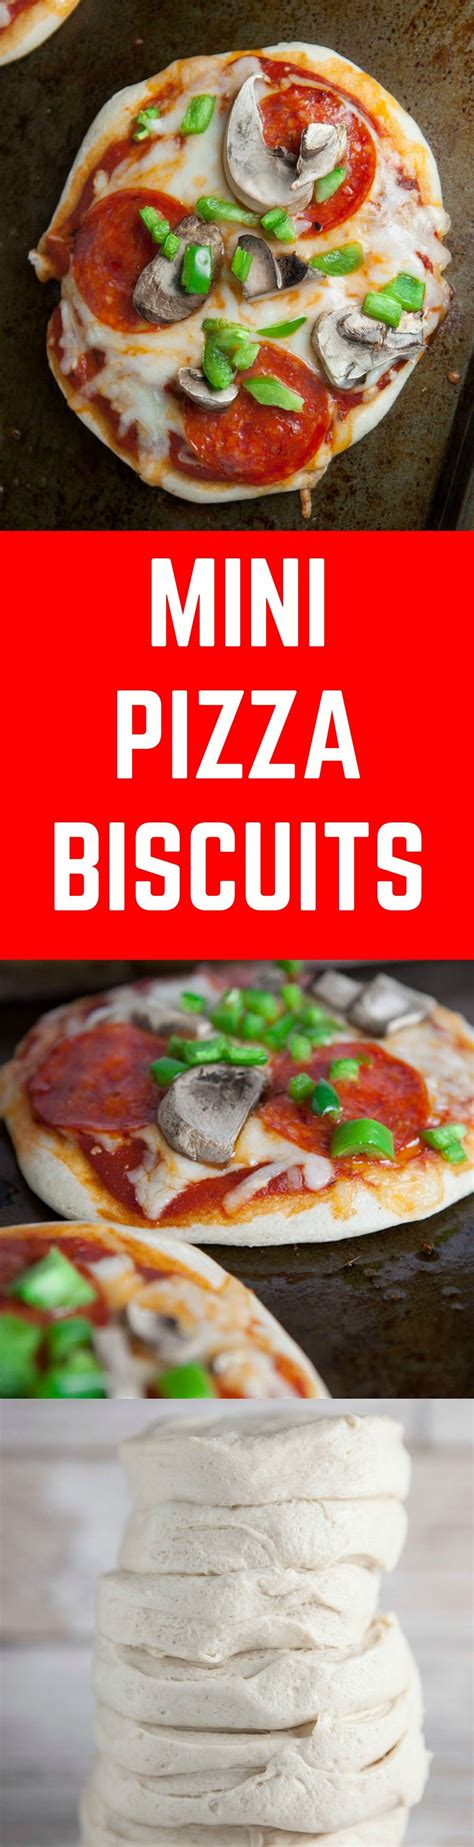 Make this season fun & bright with our delicious pillsbury baking recipes. Mini Biscuit Pizzas | Recipe | Biscuit pizza, Food recipes ...